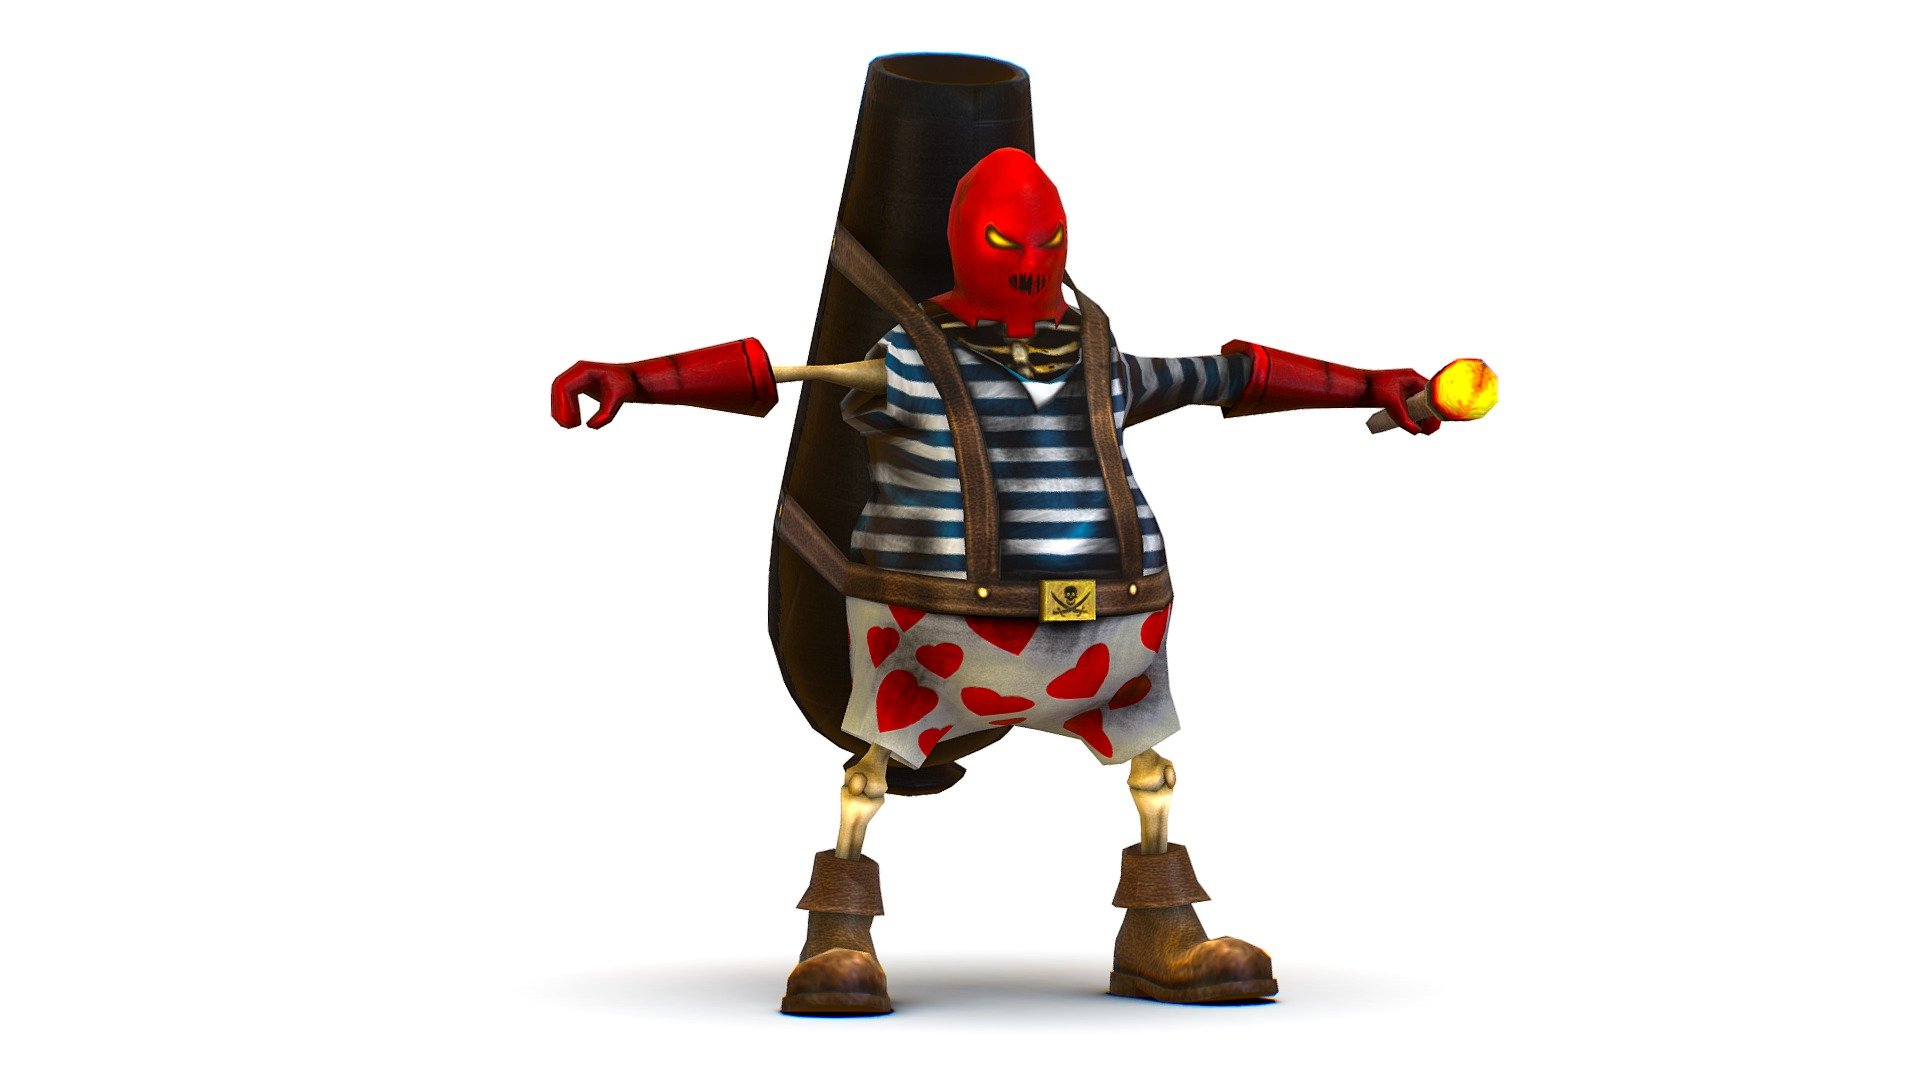 Skined Rigged Low Poly 3d model  - Skined Pirate Red Mask Cannon - Gunner - Maya file included - Skined Pirate Red Mask Cannon - Gunner - Buy Royalty Free 3D model by Oleg Shuldiakov (@olegshuldiakov) 3d model